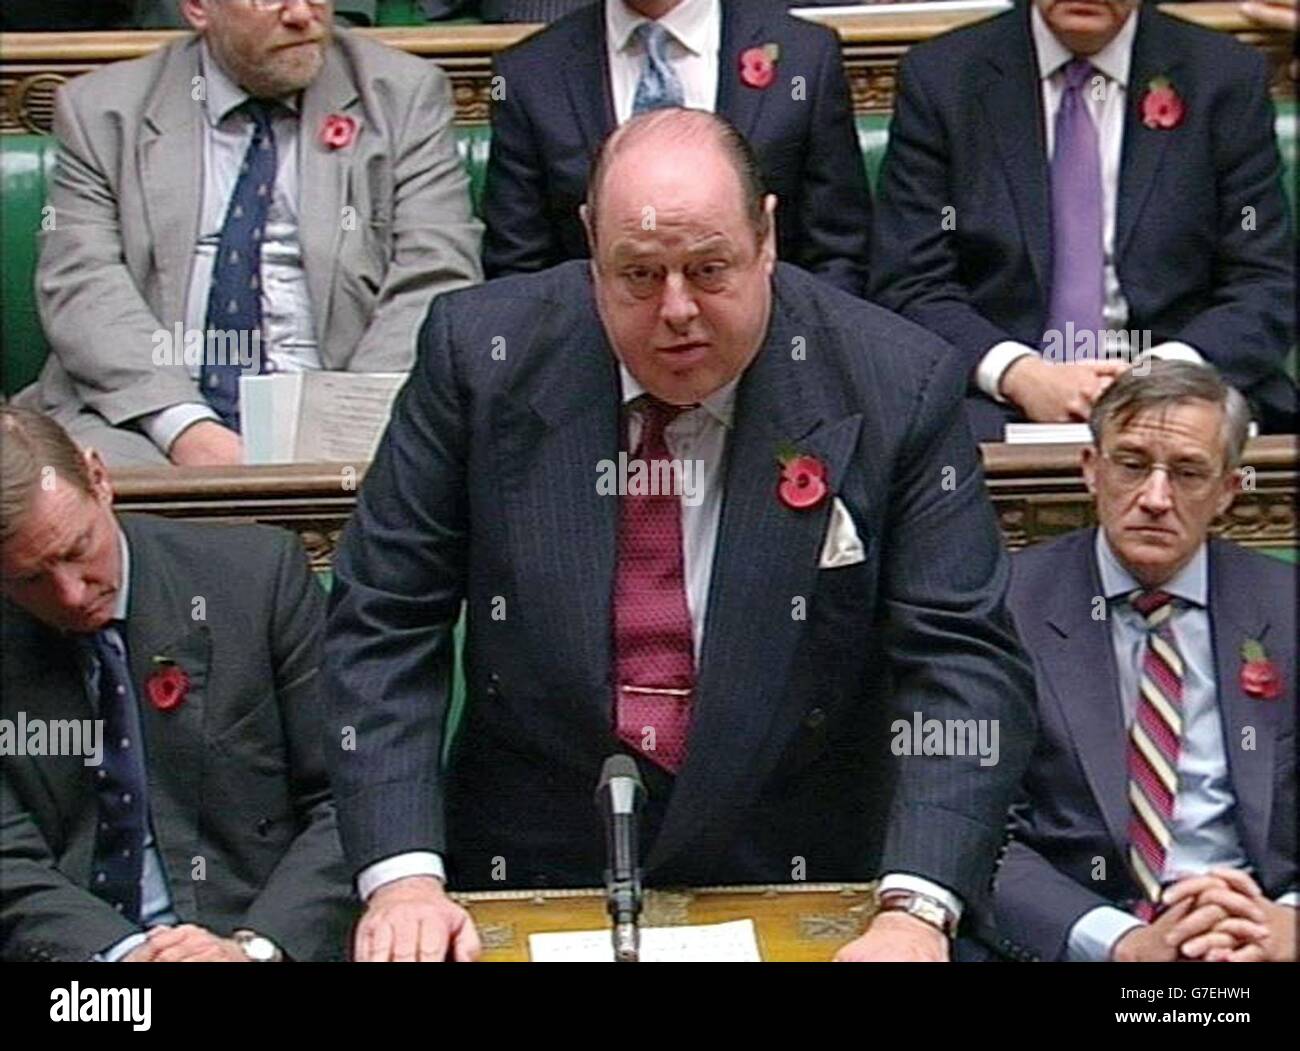 Shadow defence secretary Nicholas Soames thanks Mr Ingram for coming to the Commons with the 'grave news'. Mr Soames said:'Her Majesty's Loyal Opposition extends its condolences to the families of the three soldiers of the Black Watch who have this day given their lives in action and also to the families of those involved,' he said. 'Mr Deputy Speaker, the whole country will want to wish the Black Watch well as they continue to carry out their duties.' Stock Photo